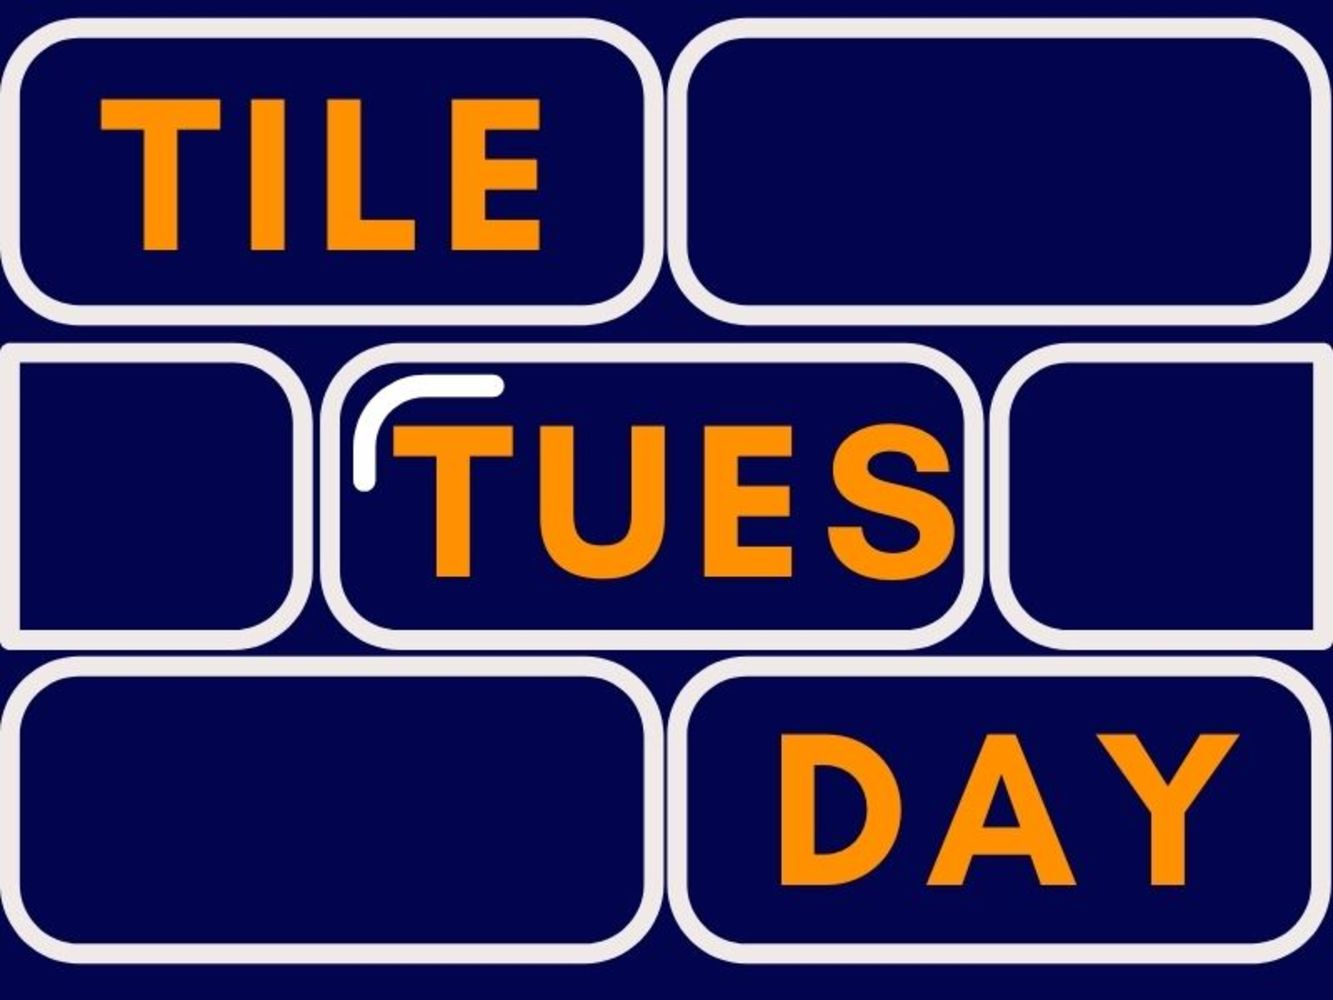 No Reserve - Tile Tuesday - “over £80k worth of tiles – Sourced from Johnsons Tiles” - 17th August 2021